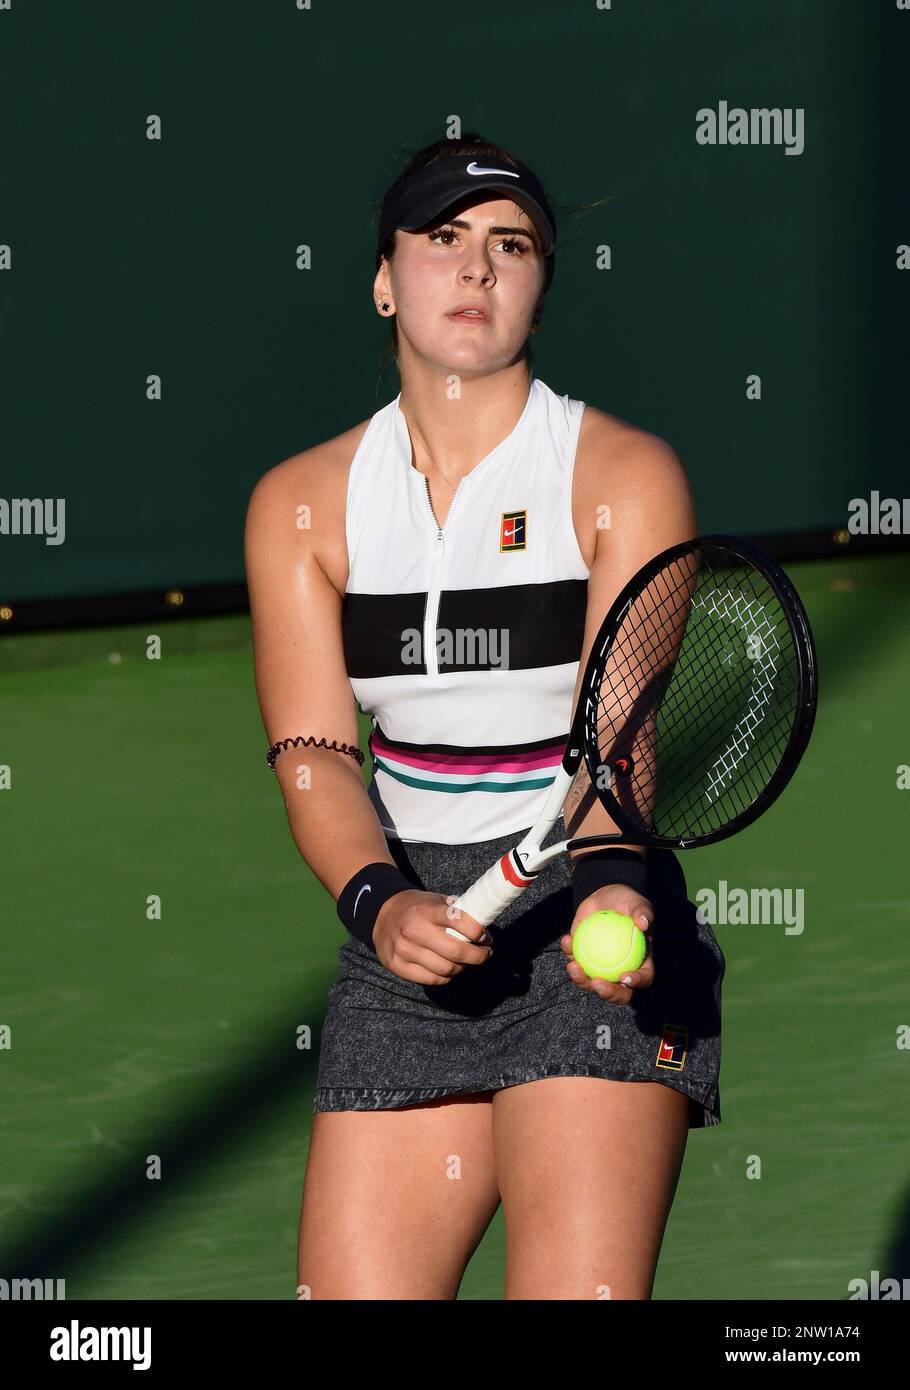 NEWPORT BEACH, CA - JANUARY 25: Bianca Andreescu (CAN) serving during a  quarterfinals match played at the Oracle Challenger Series, on January 25,  2019, at the Newport Beach Tennis Club in Newport